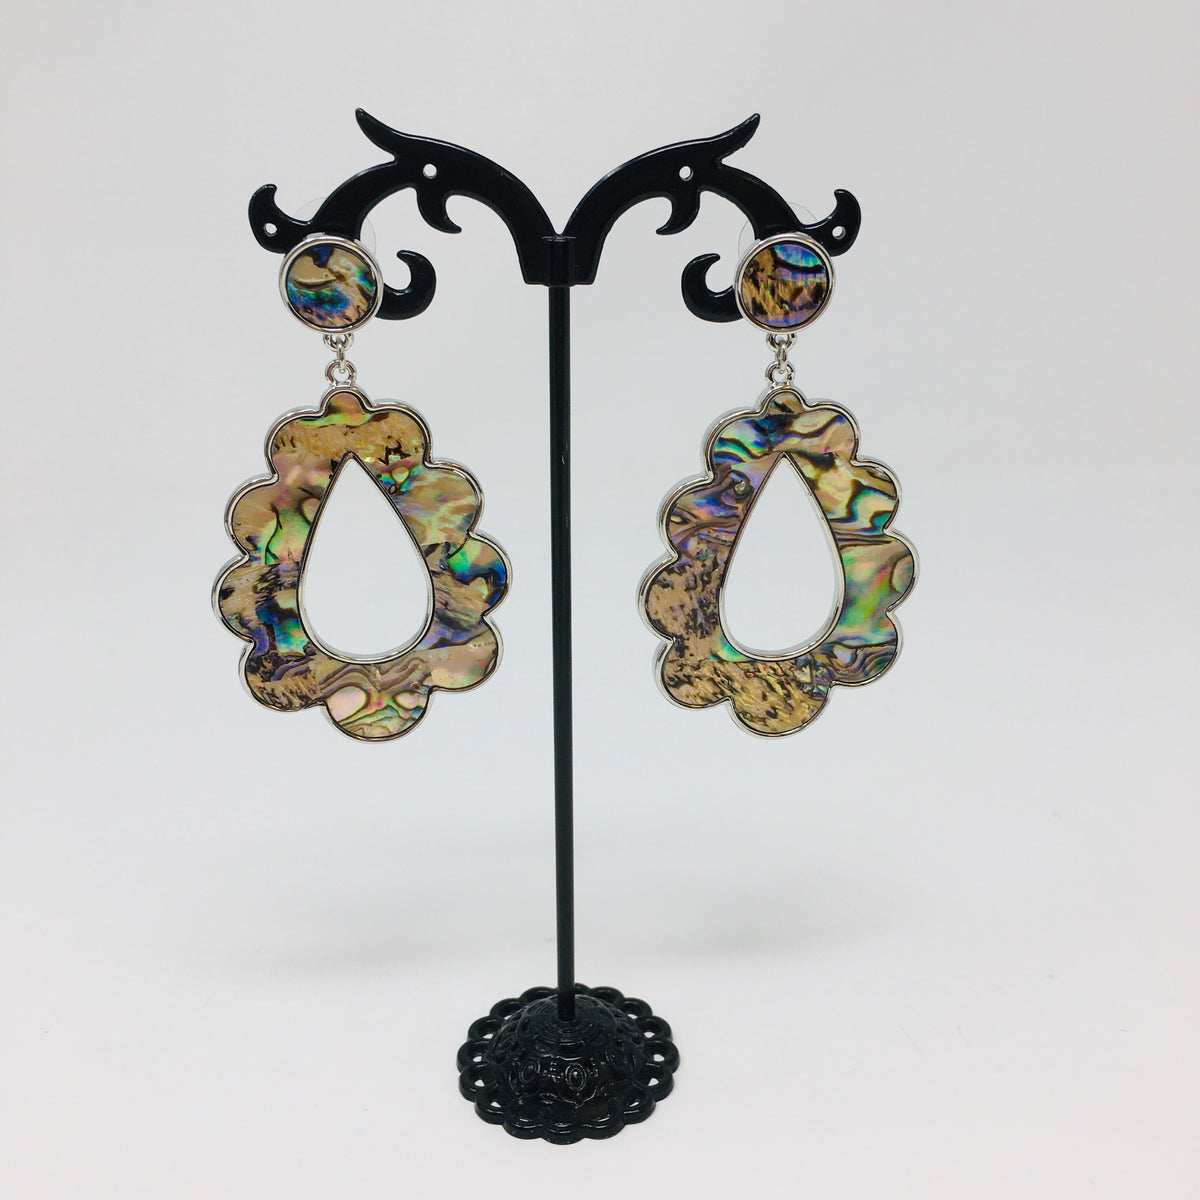 Scalloped teardrop shaped silver tone earrings with abalone shell inserts shown hanging from a black earring stand on a white background